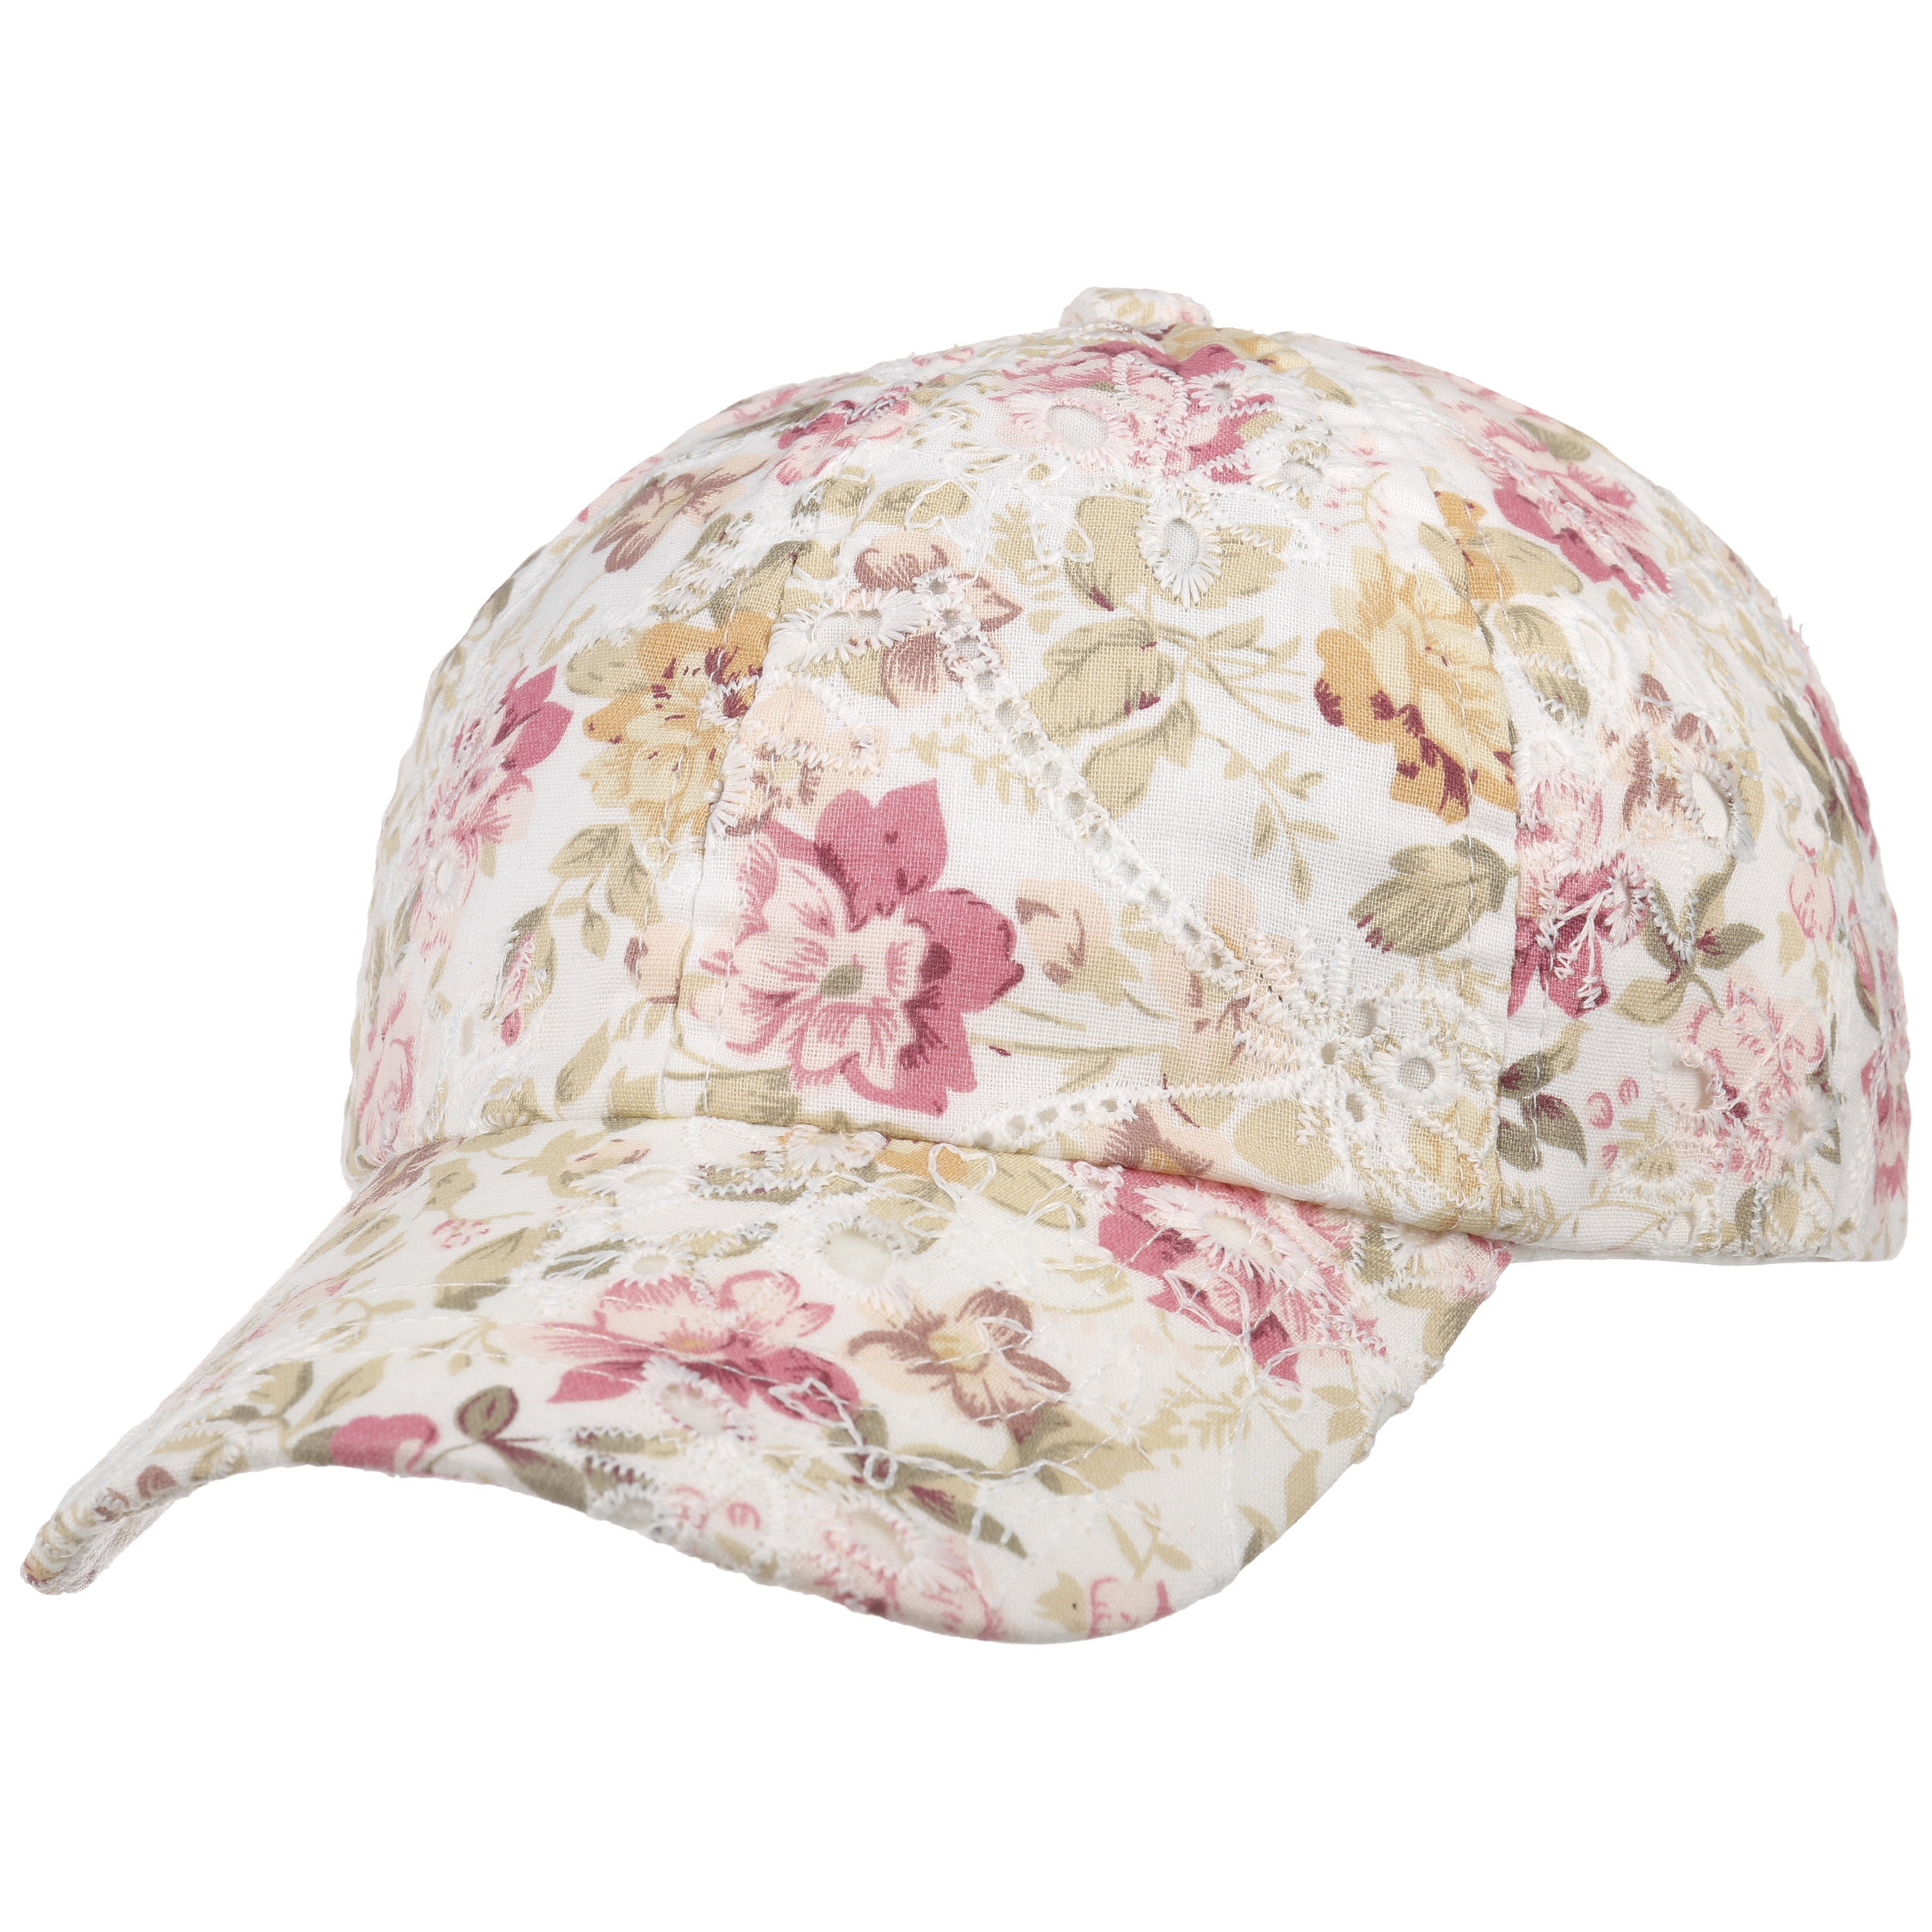 Casquette Lace Flowers Girls by Lipodo - 18,95 CHF